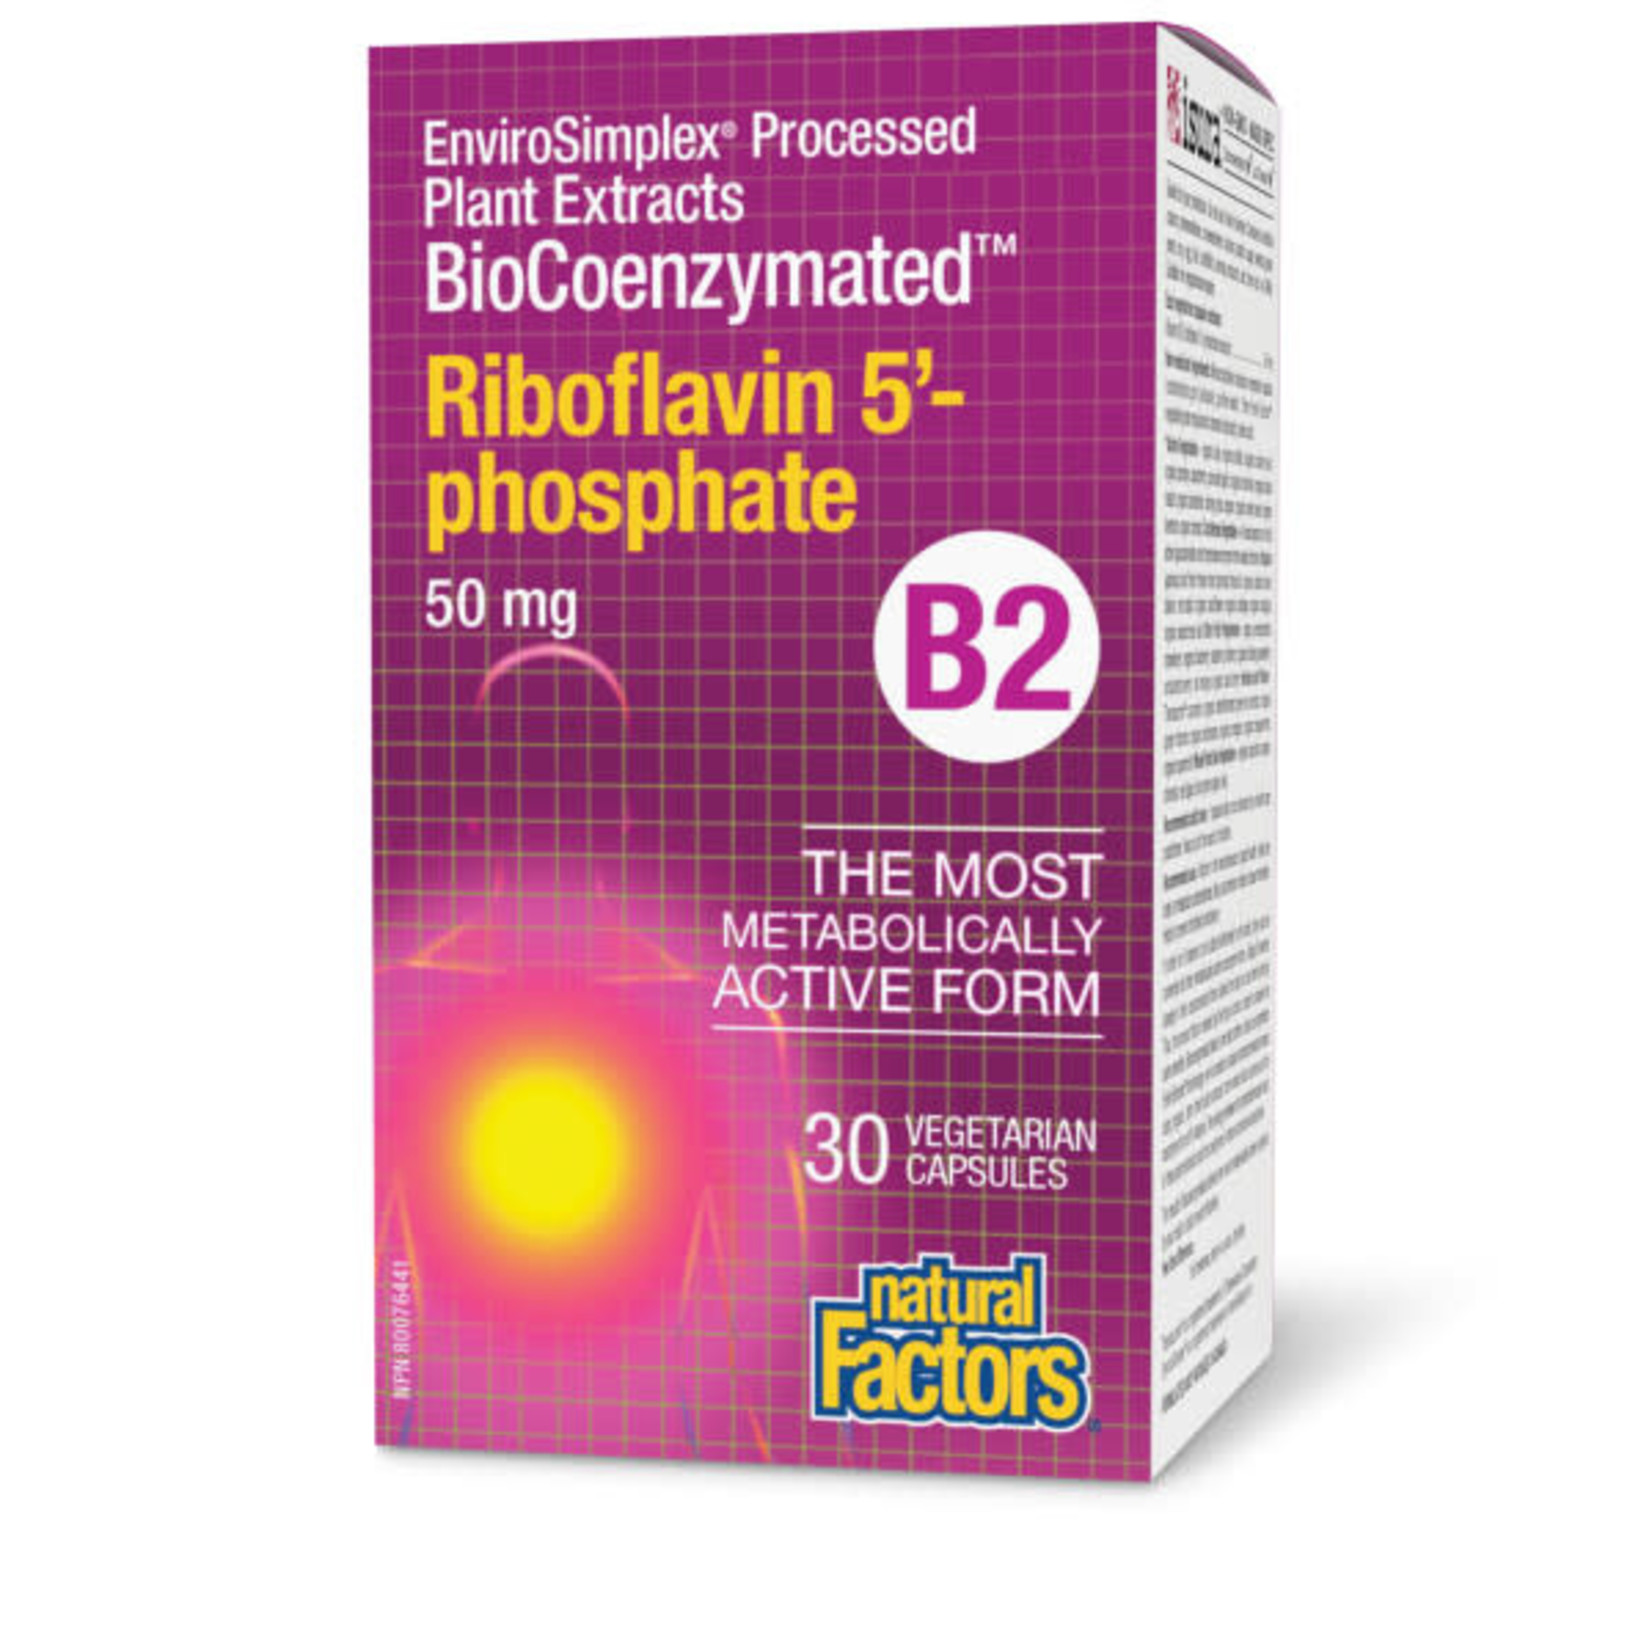 NATURAL FACTORS BIOCOENZYMATED RIBOFLAVIN 5' PHOSPHATE B2 50MG 30 VCAPS